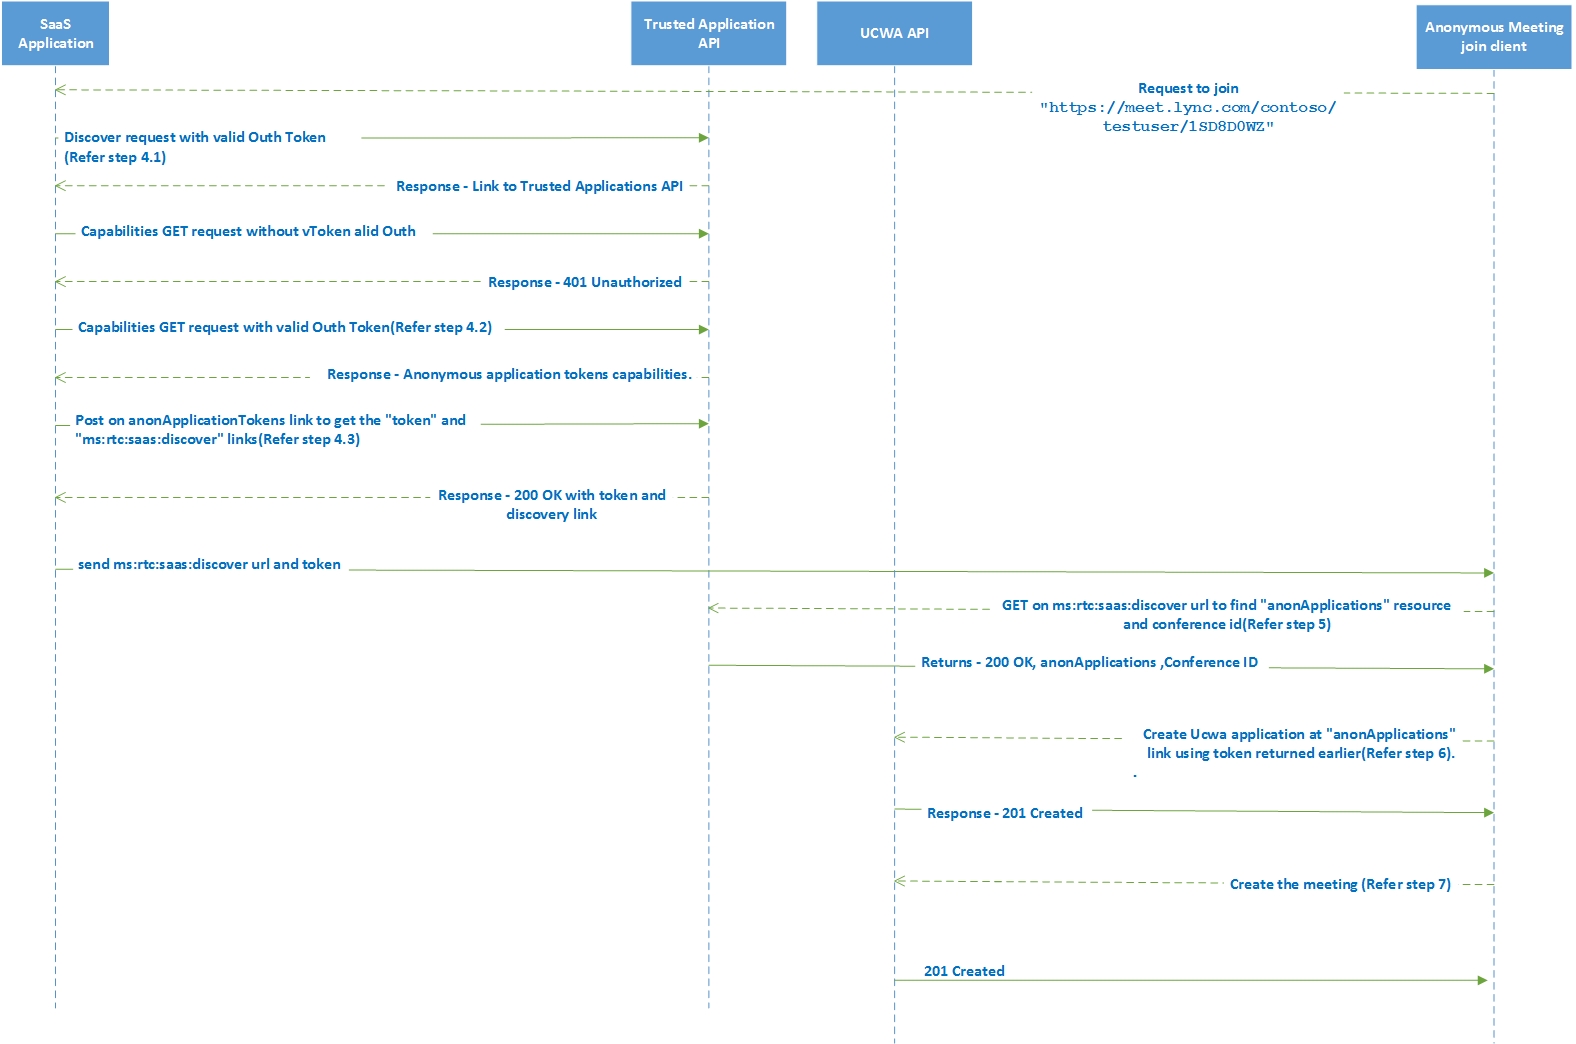 Screenshot diagram showing the flow of the get requests and responses of the meeting flow including the Oauth path.